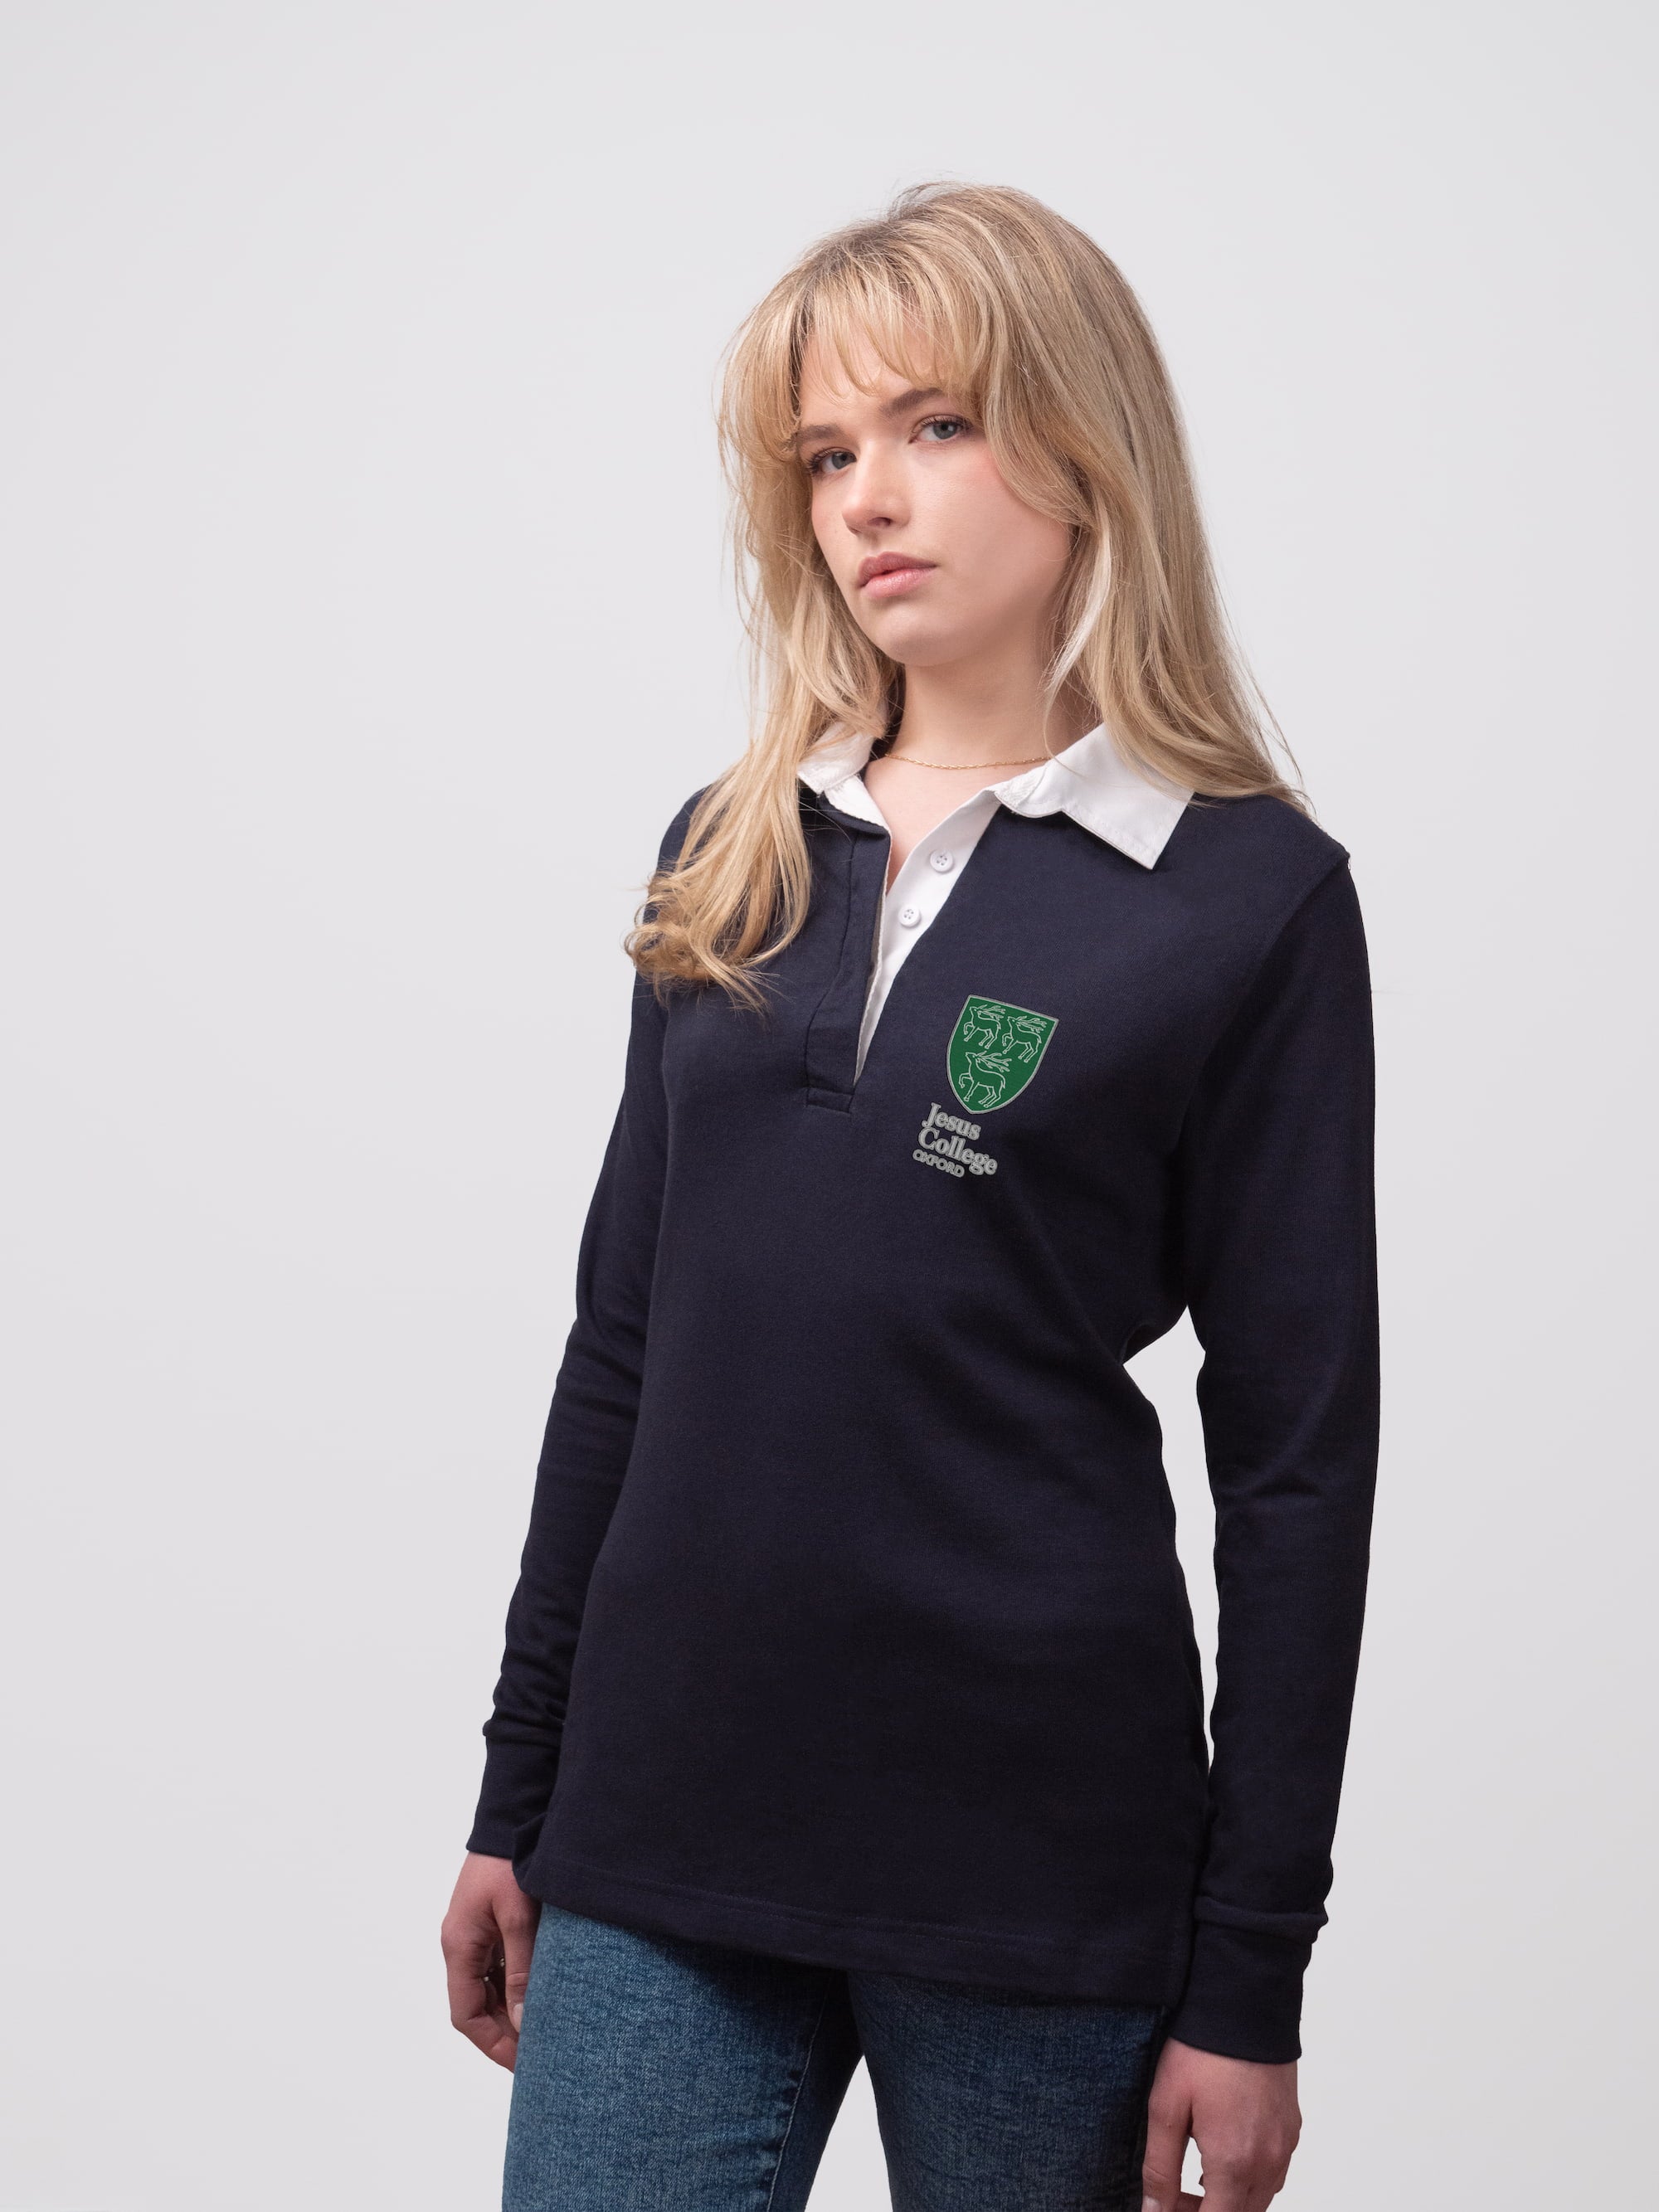 Student wearing a navy Jesus College rugby shirt with embroidered crest